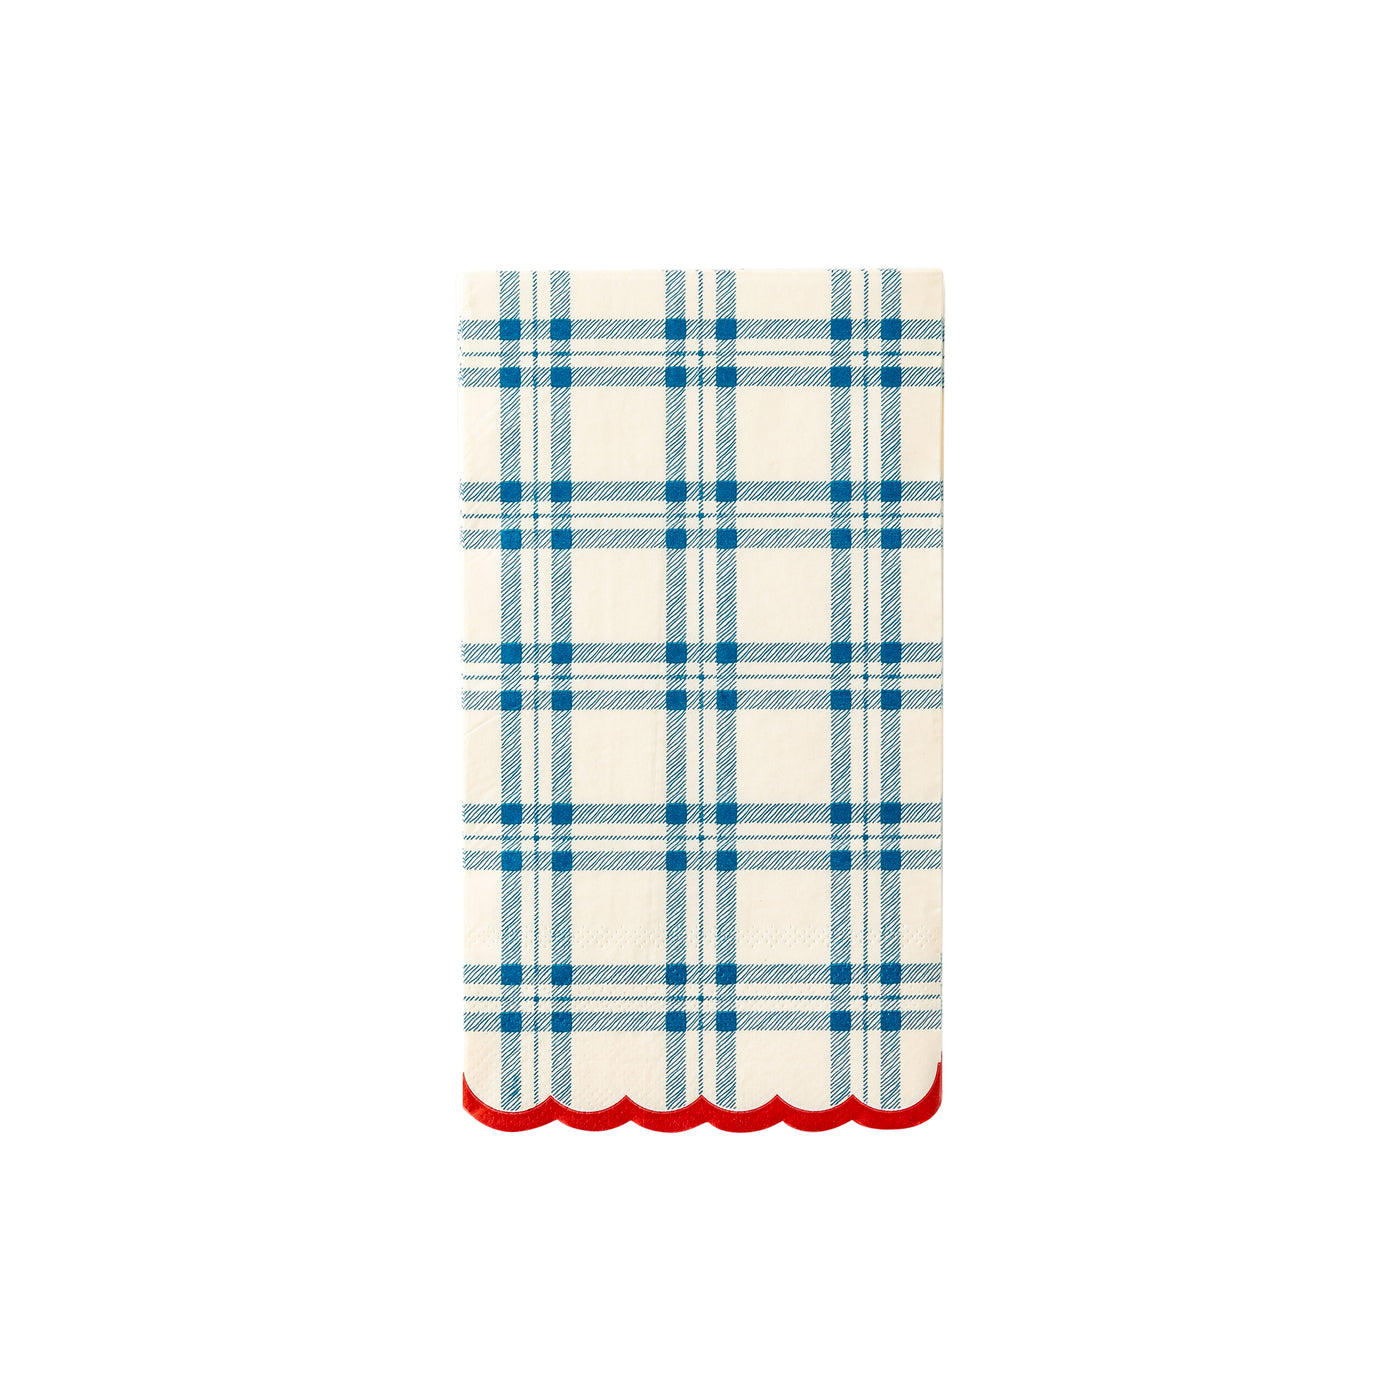 PLTS368o-MME - Blue Scallop Plaid Paper Dinner Napkin